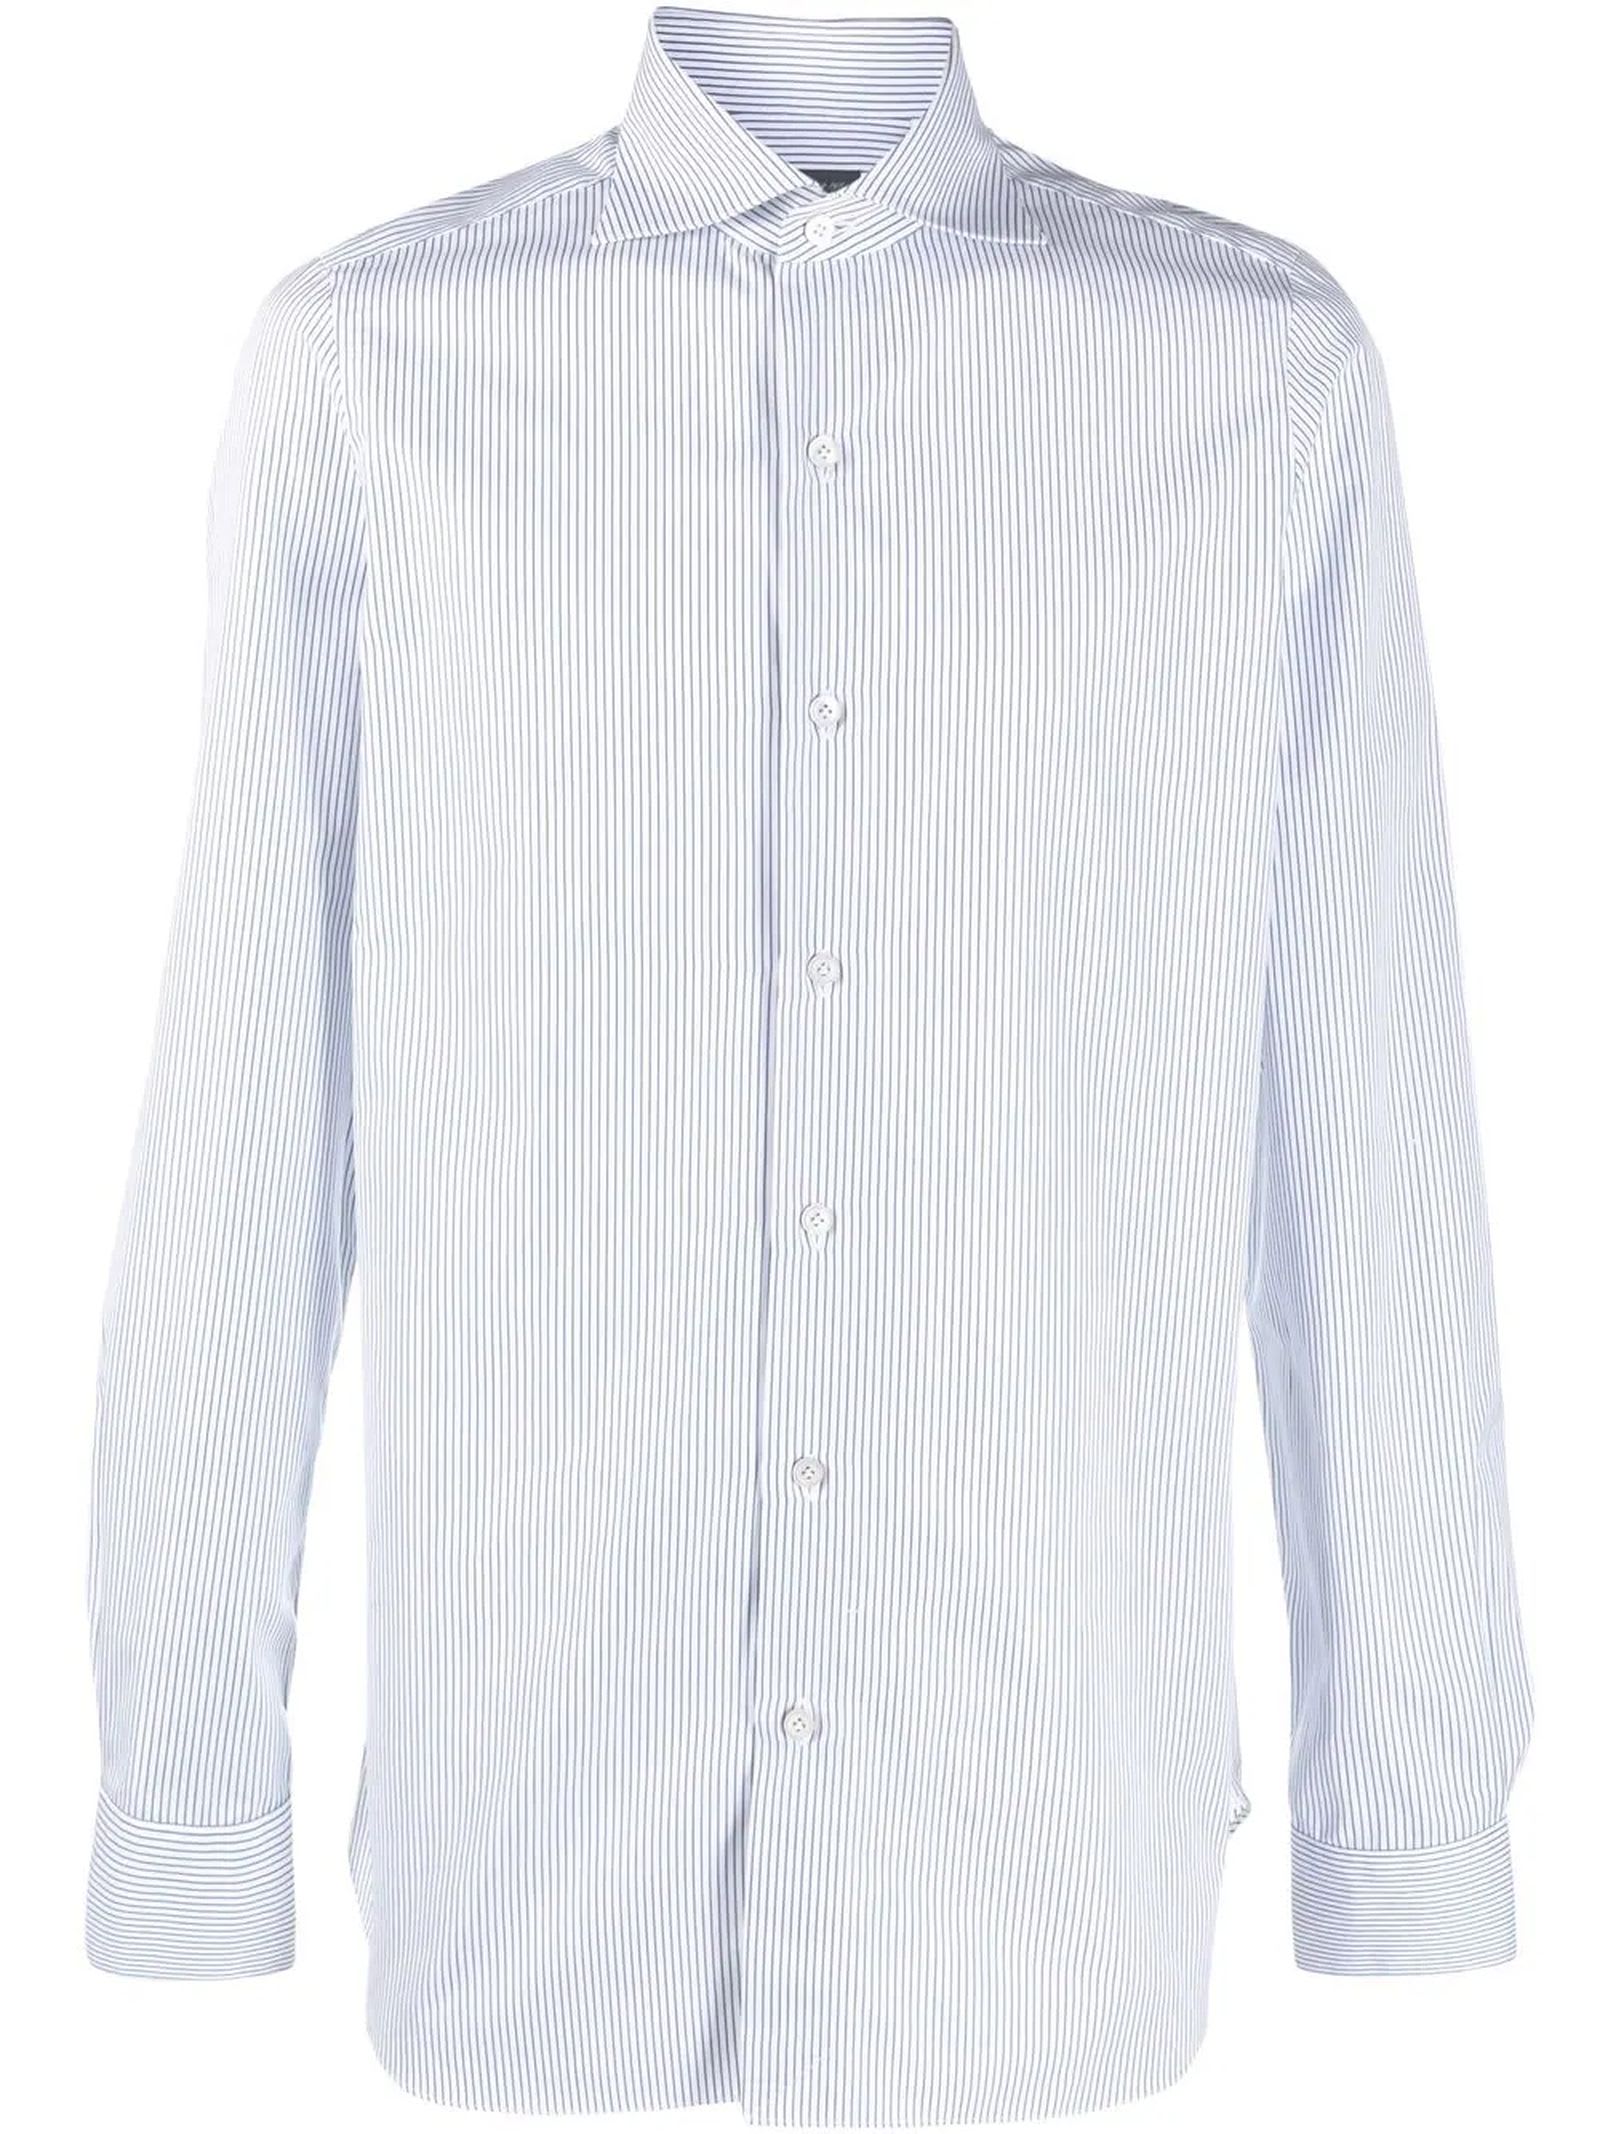 Finamore White And Blue Cotton Shirt